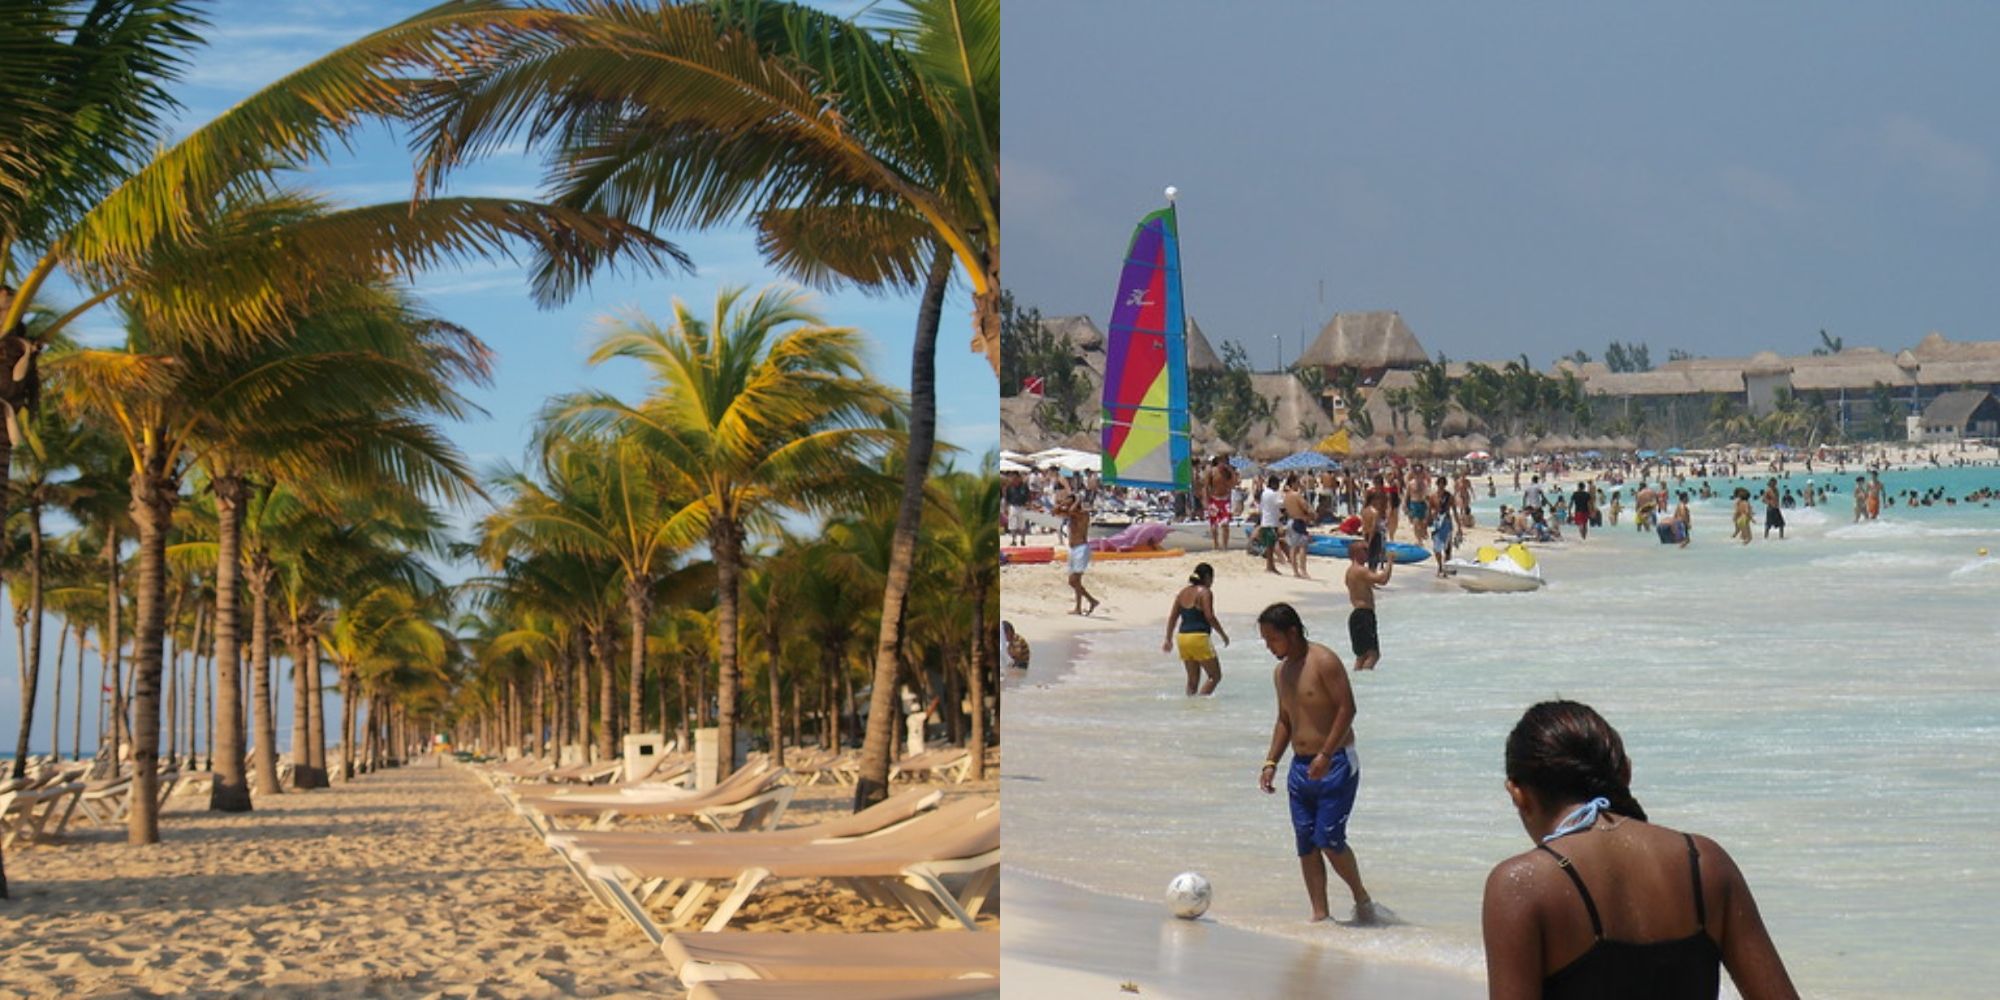 palm trees and sand in mexico and people walking in the ocean in mexico